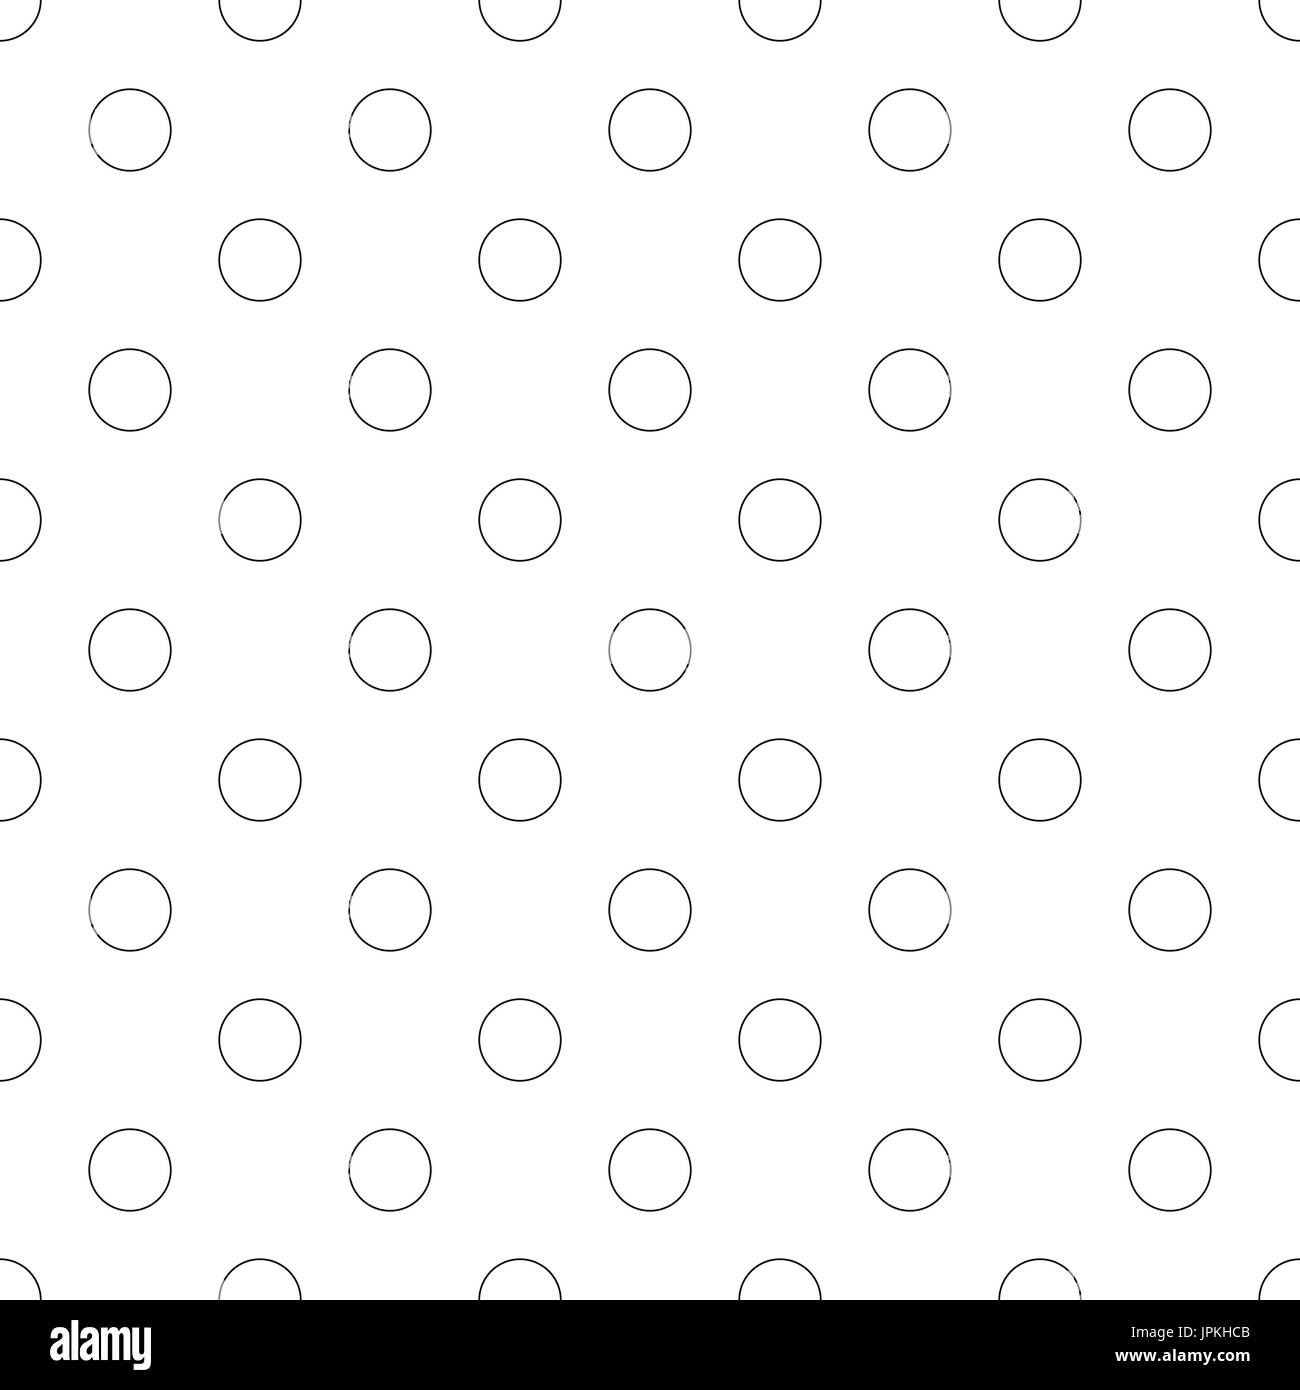 Seamless monochrome circle pattern - simple vector background graphic design Stock Vector